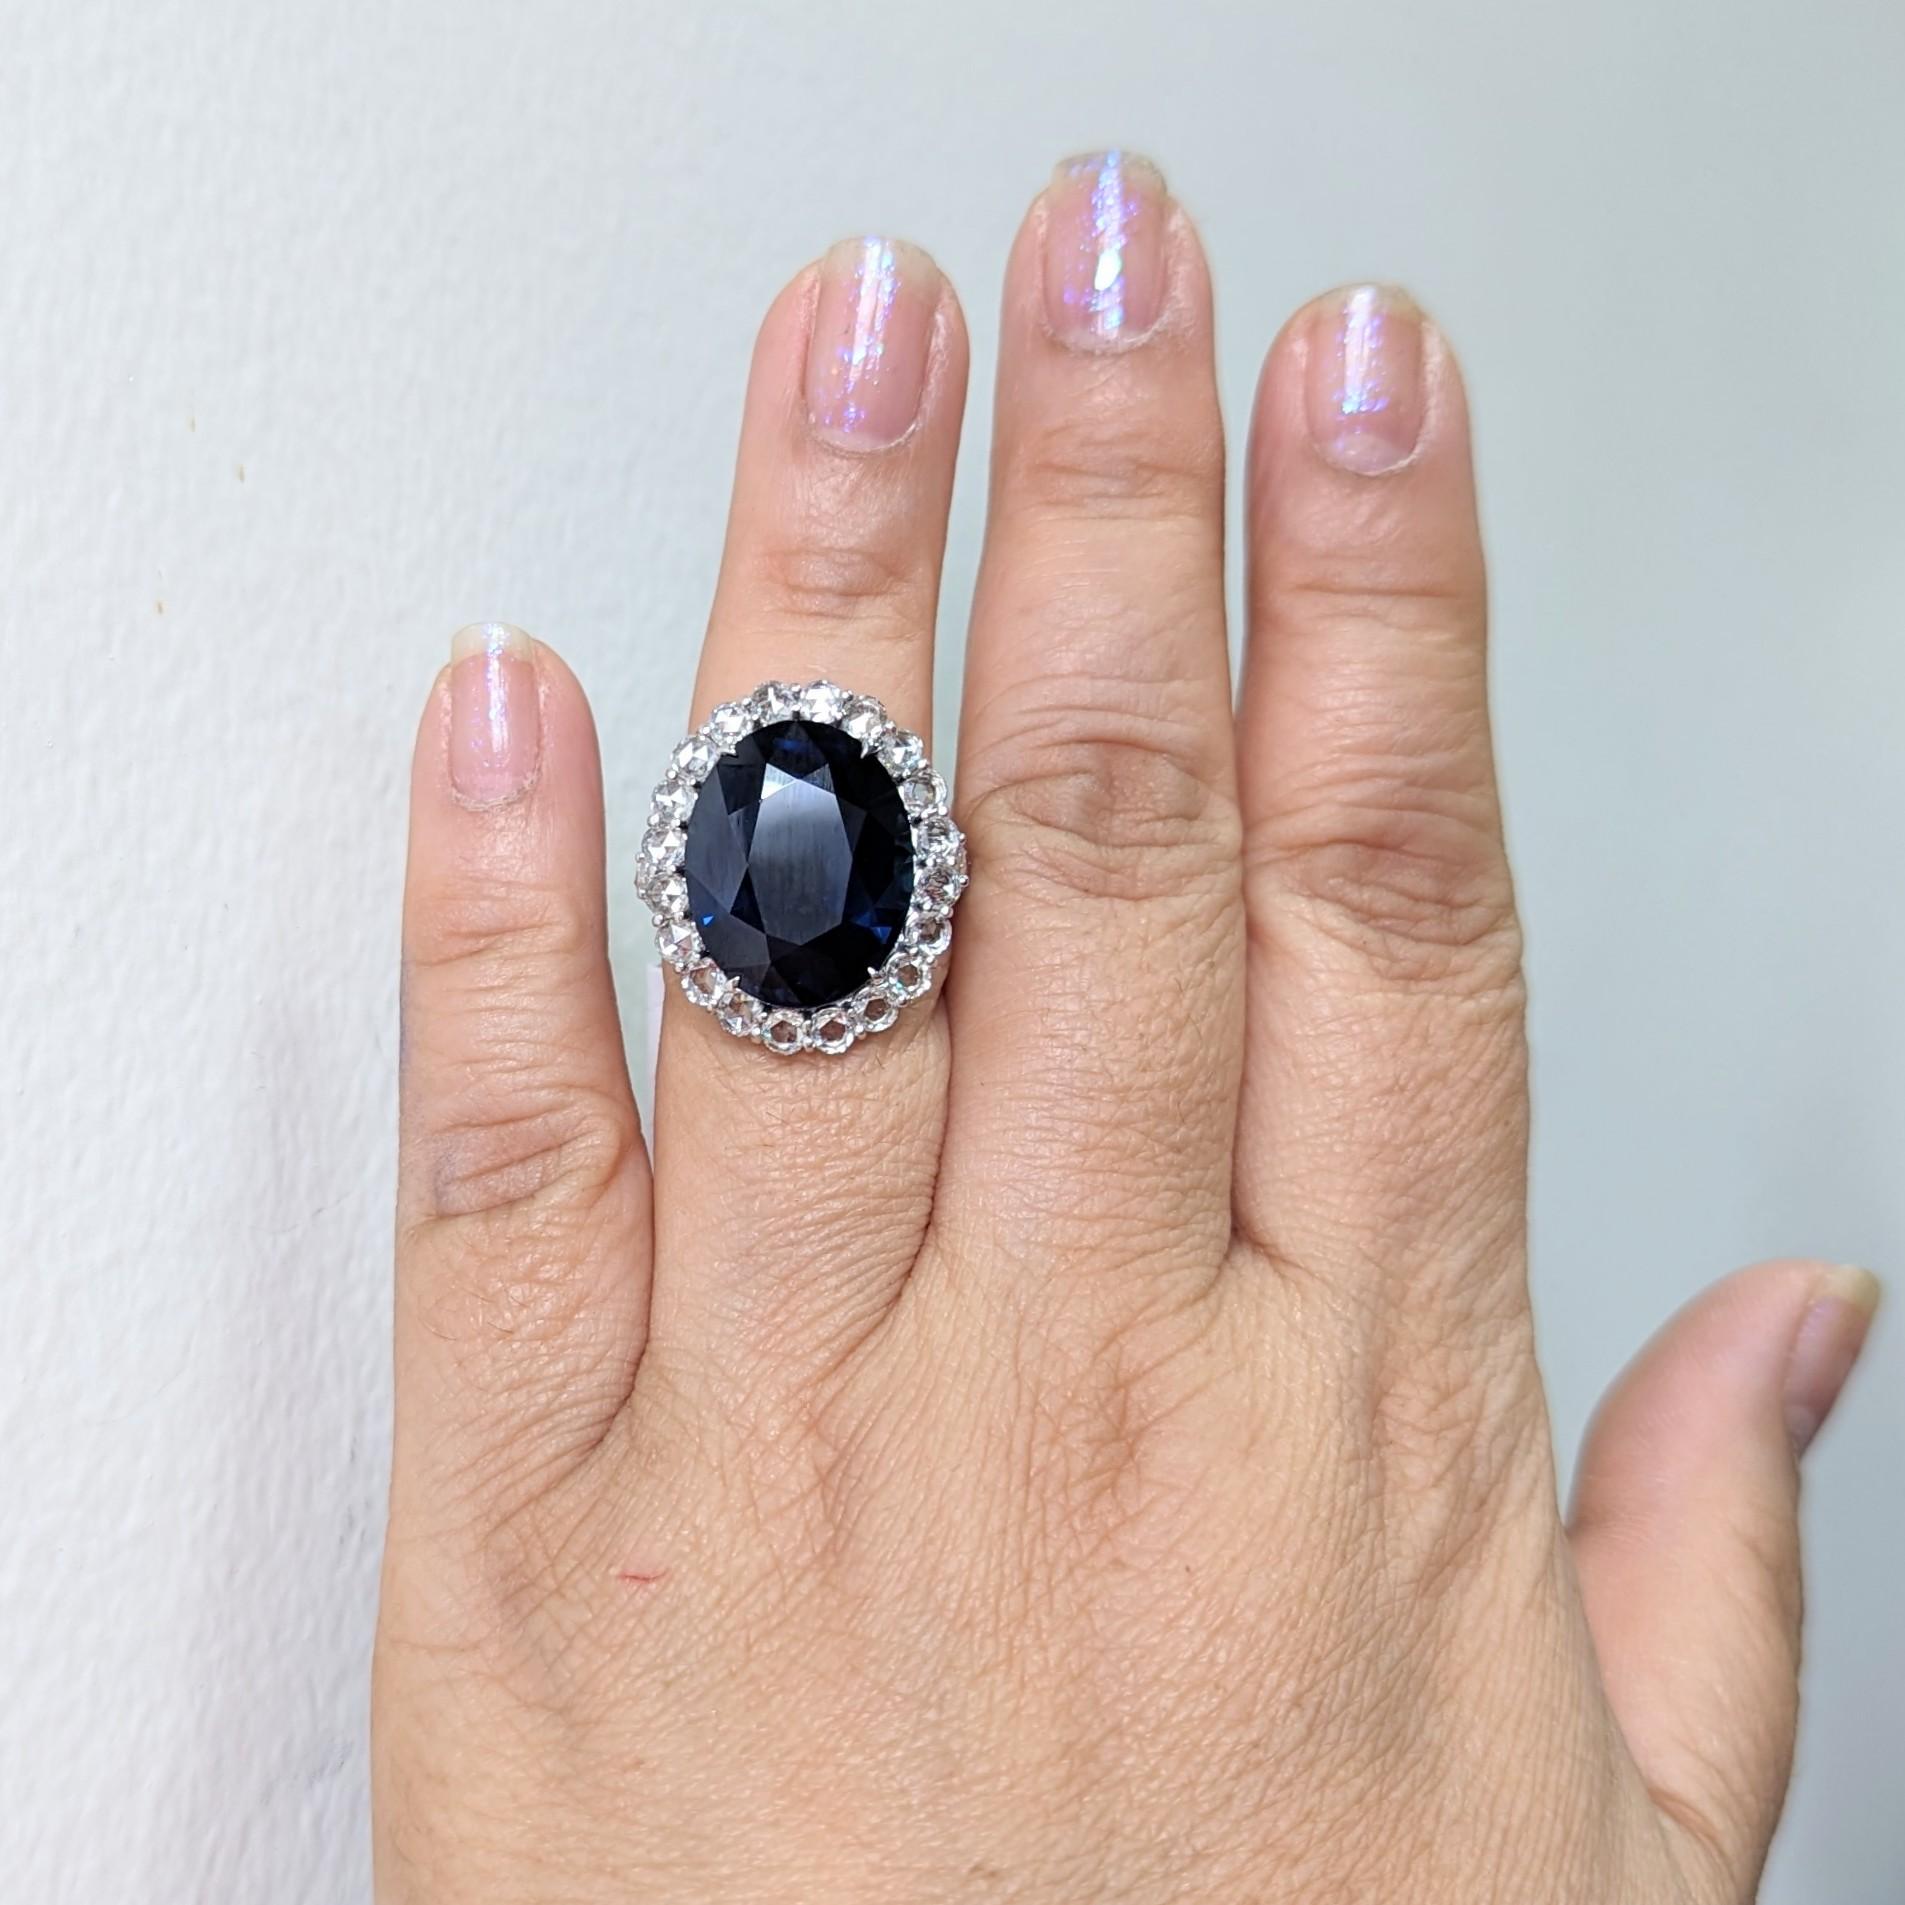 This Blue Sapphire ring is a statement piece with beautiful rosecut diamonds surrounding the stone and on the band.  A classic design with a twist using rosecuts instead of faceted diamonds.  This delicate yet powerful piece is made out of platinum